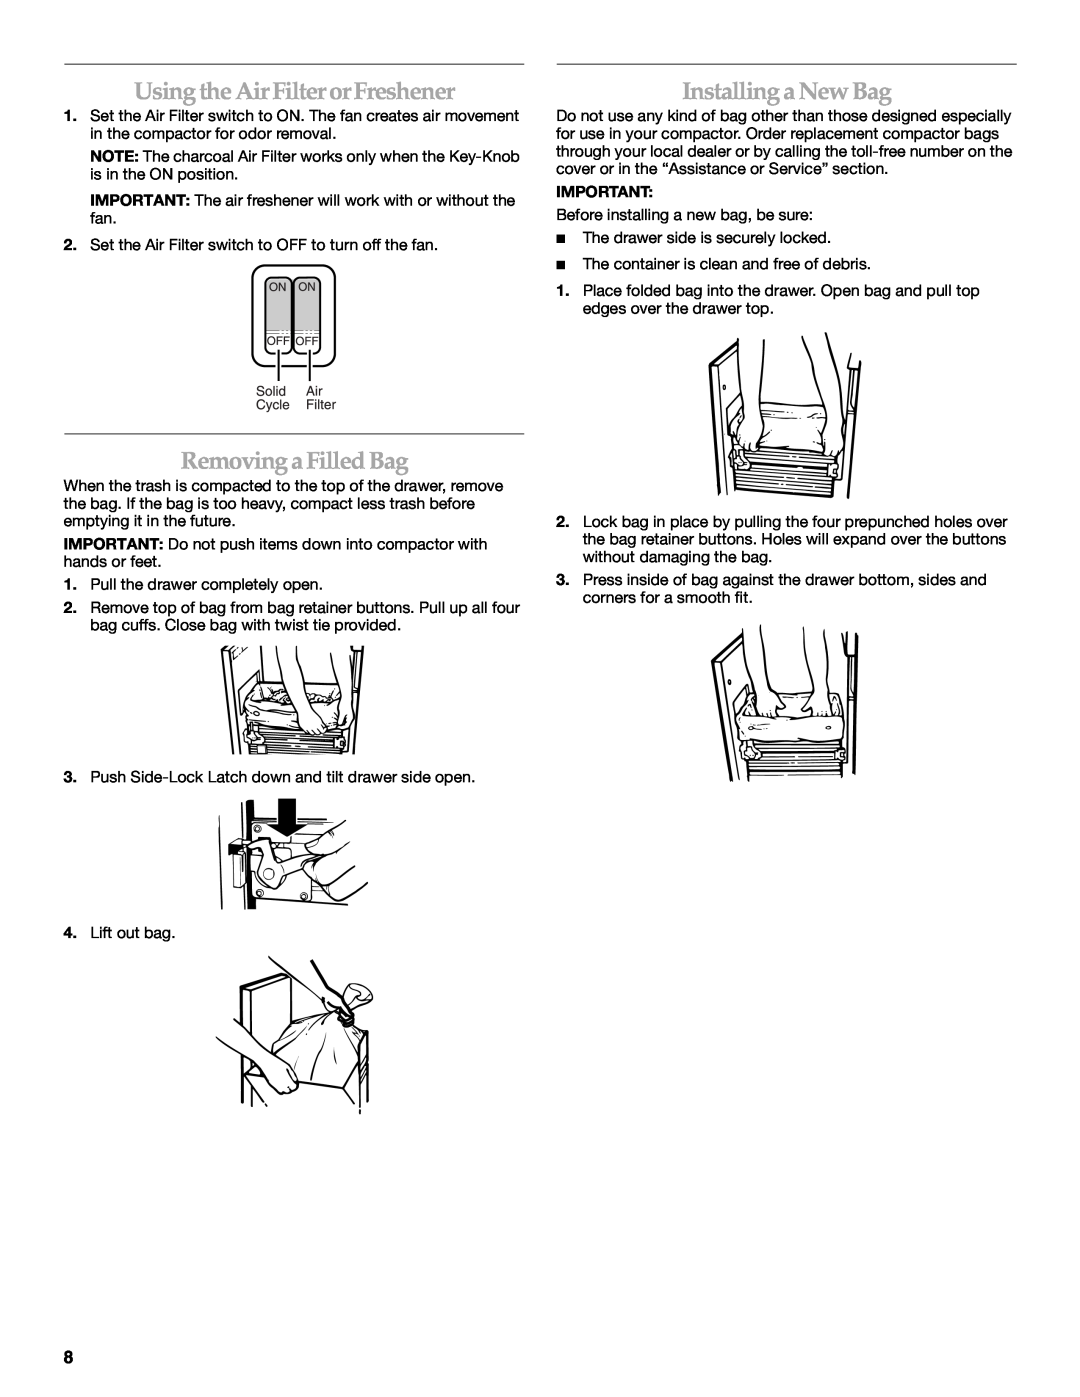 KitchenAid W10242569A, KUCS03FTSS manual Using the Air Filter or Freshener, Removing a Filled Bag, Installing a New Bag 